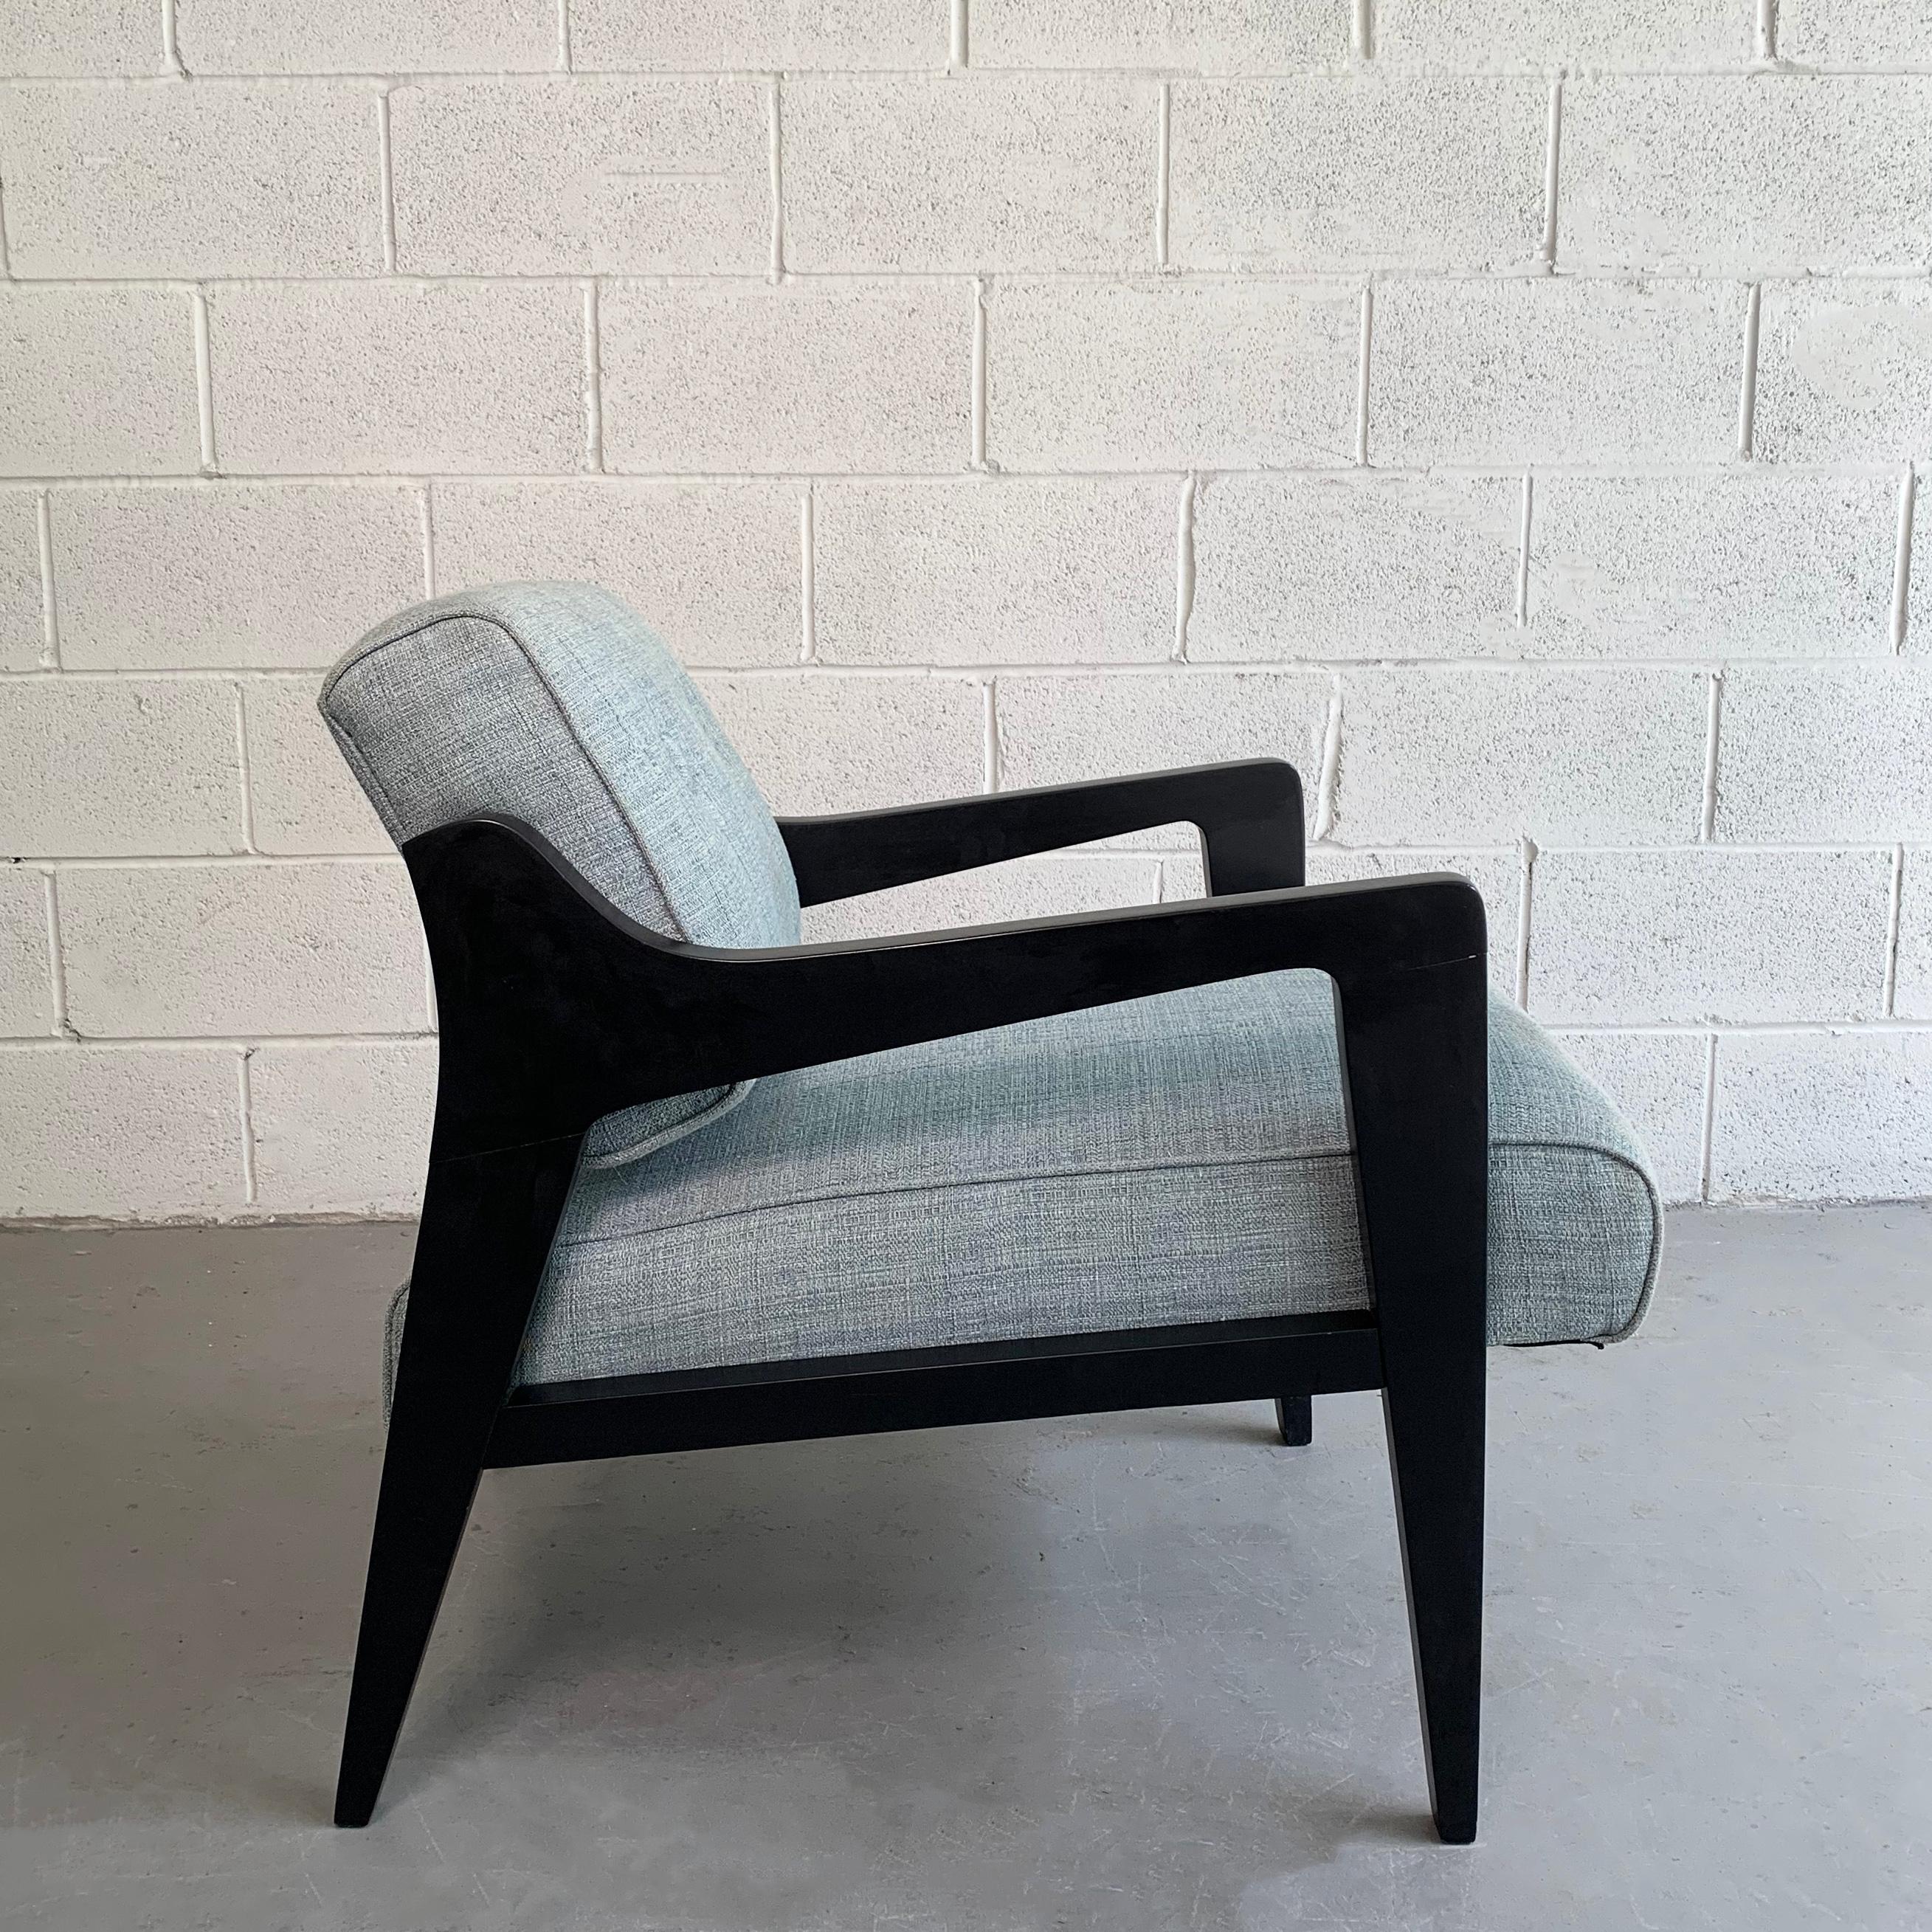 Mid-Century Modern, low profile, lounge chair by Edward Wormley for Dunbar features a stylized, black lacquered maple frame is newly upholstered in contrasting light blue, woven, cotton linen blend.